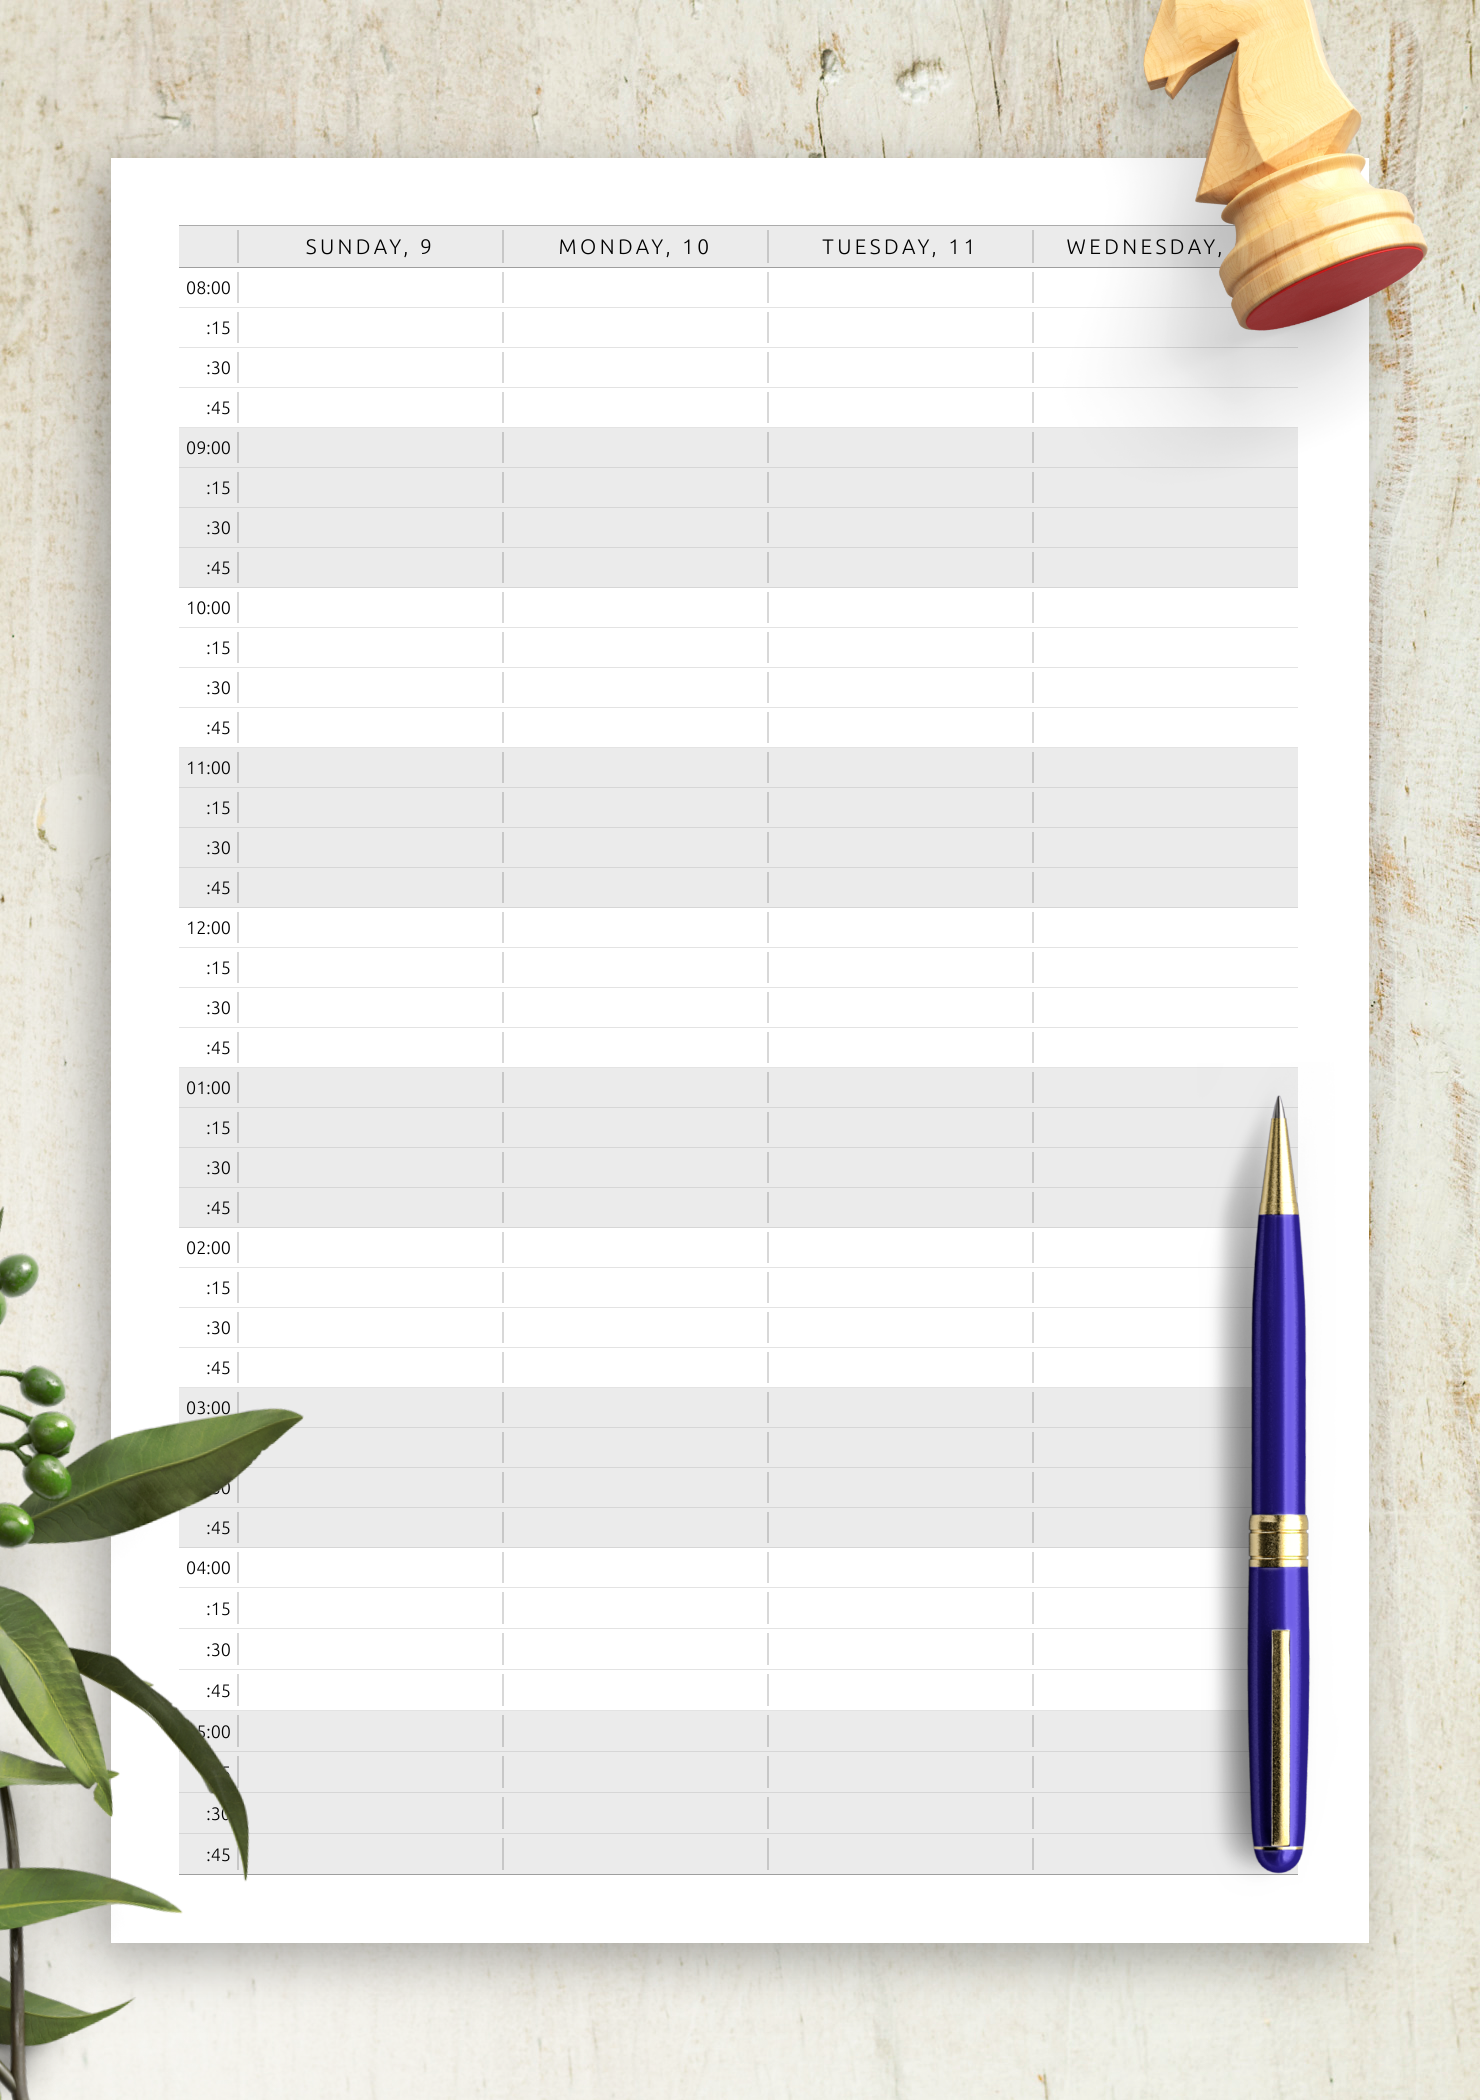 free-appointment-schedule-template-luxury-printable-weekly-appointment-appointment-calendar